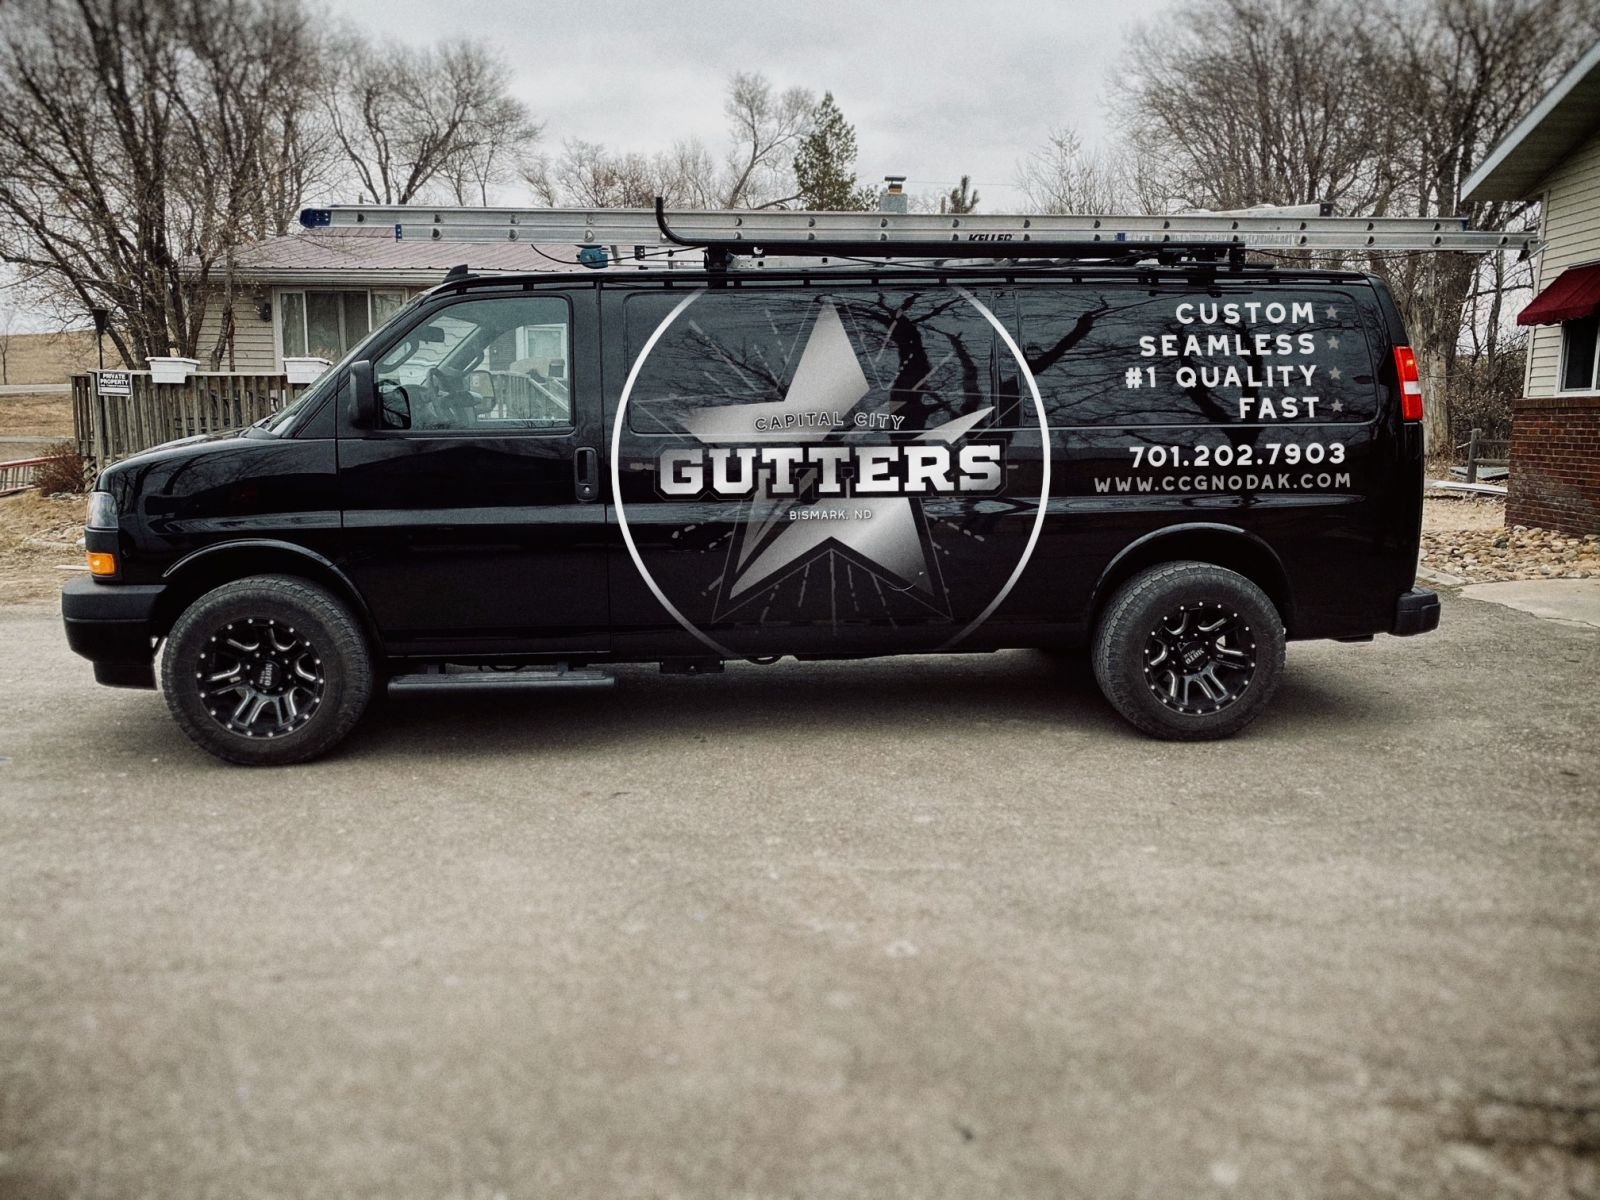 Capital City Gutters Logo and Van Decal